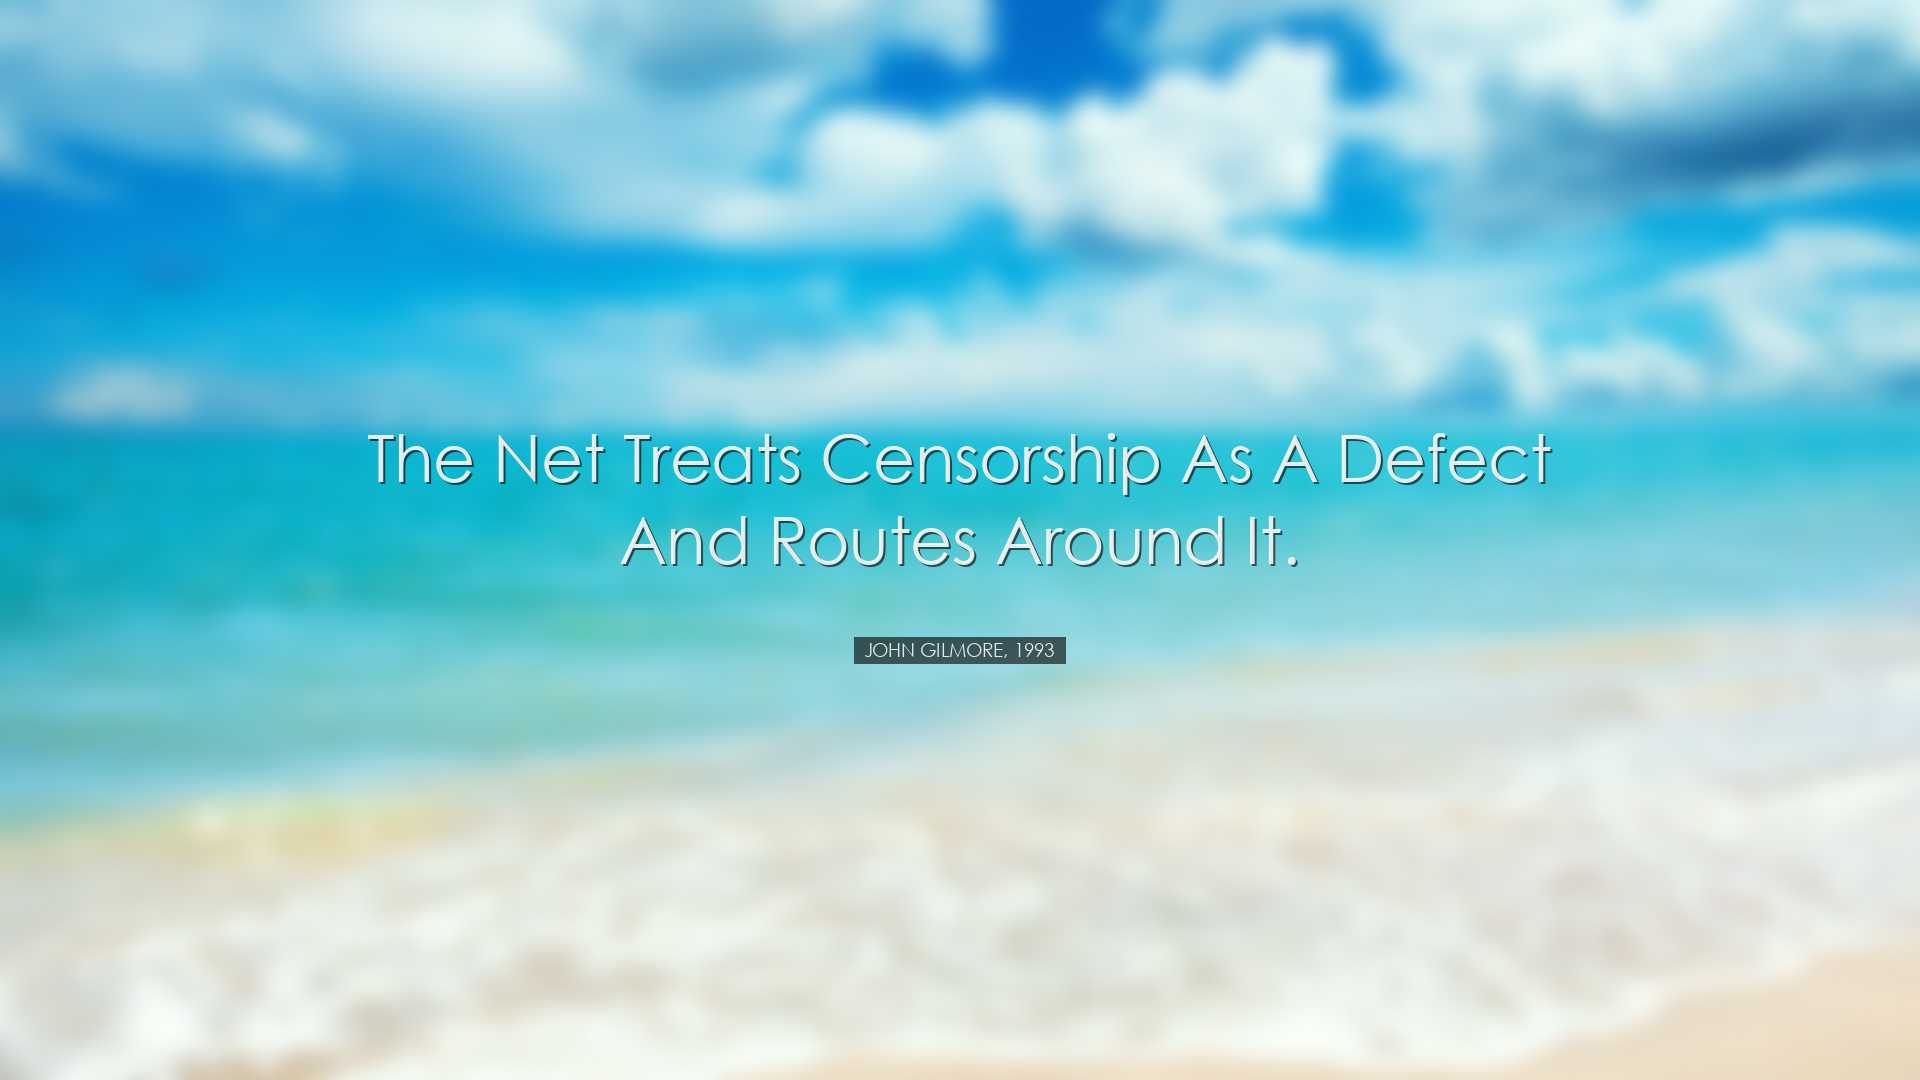 The Net treats censorship as a defect and routes around it. - John